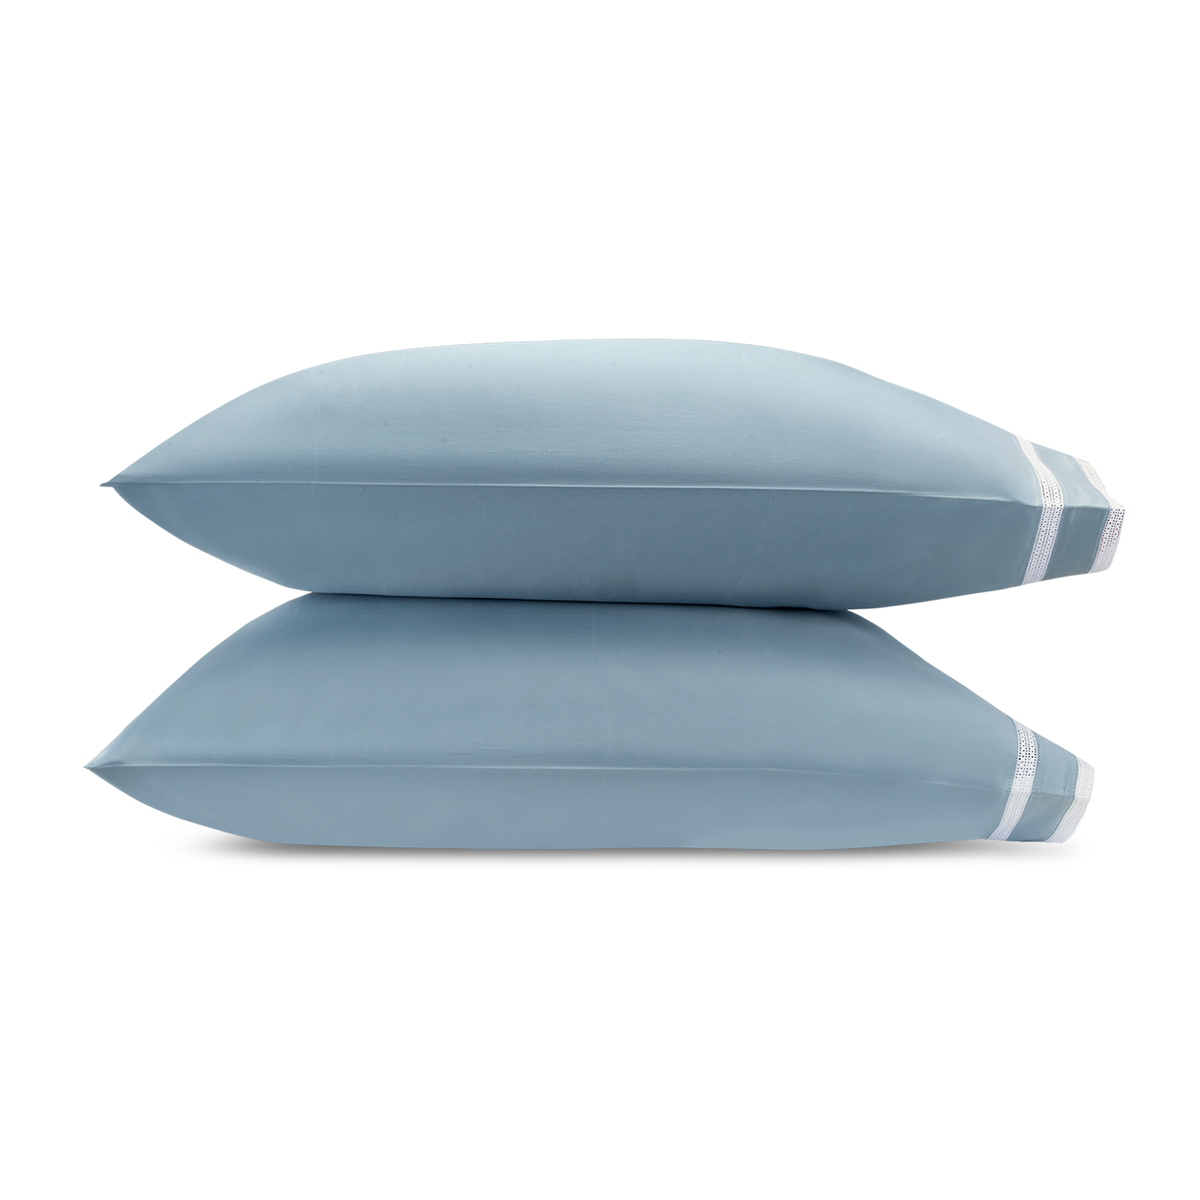 Pair of Pillowcase of Matouk Grace Bedding in Color Hazy Blue